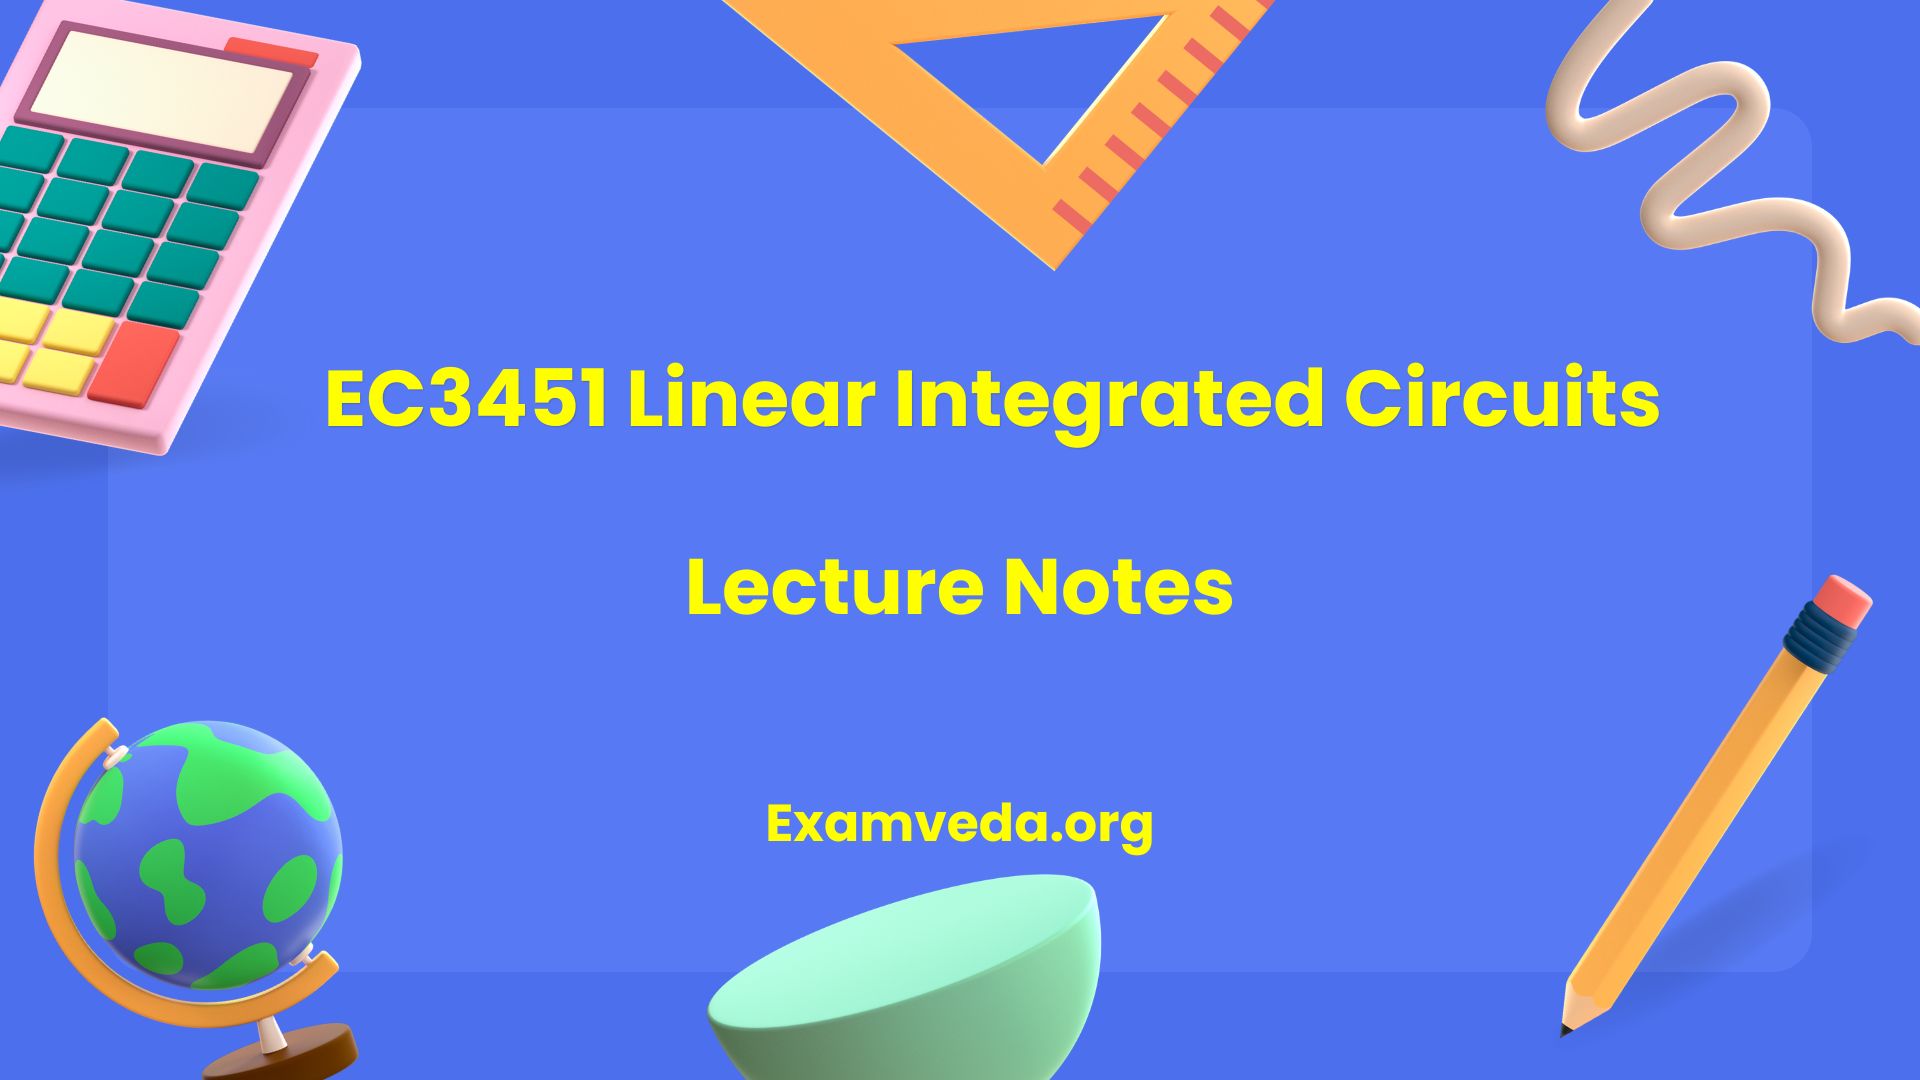 EC3451 Linear Integrated Circuits Lecture Notes